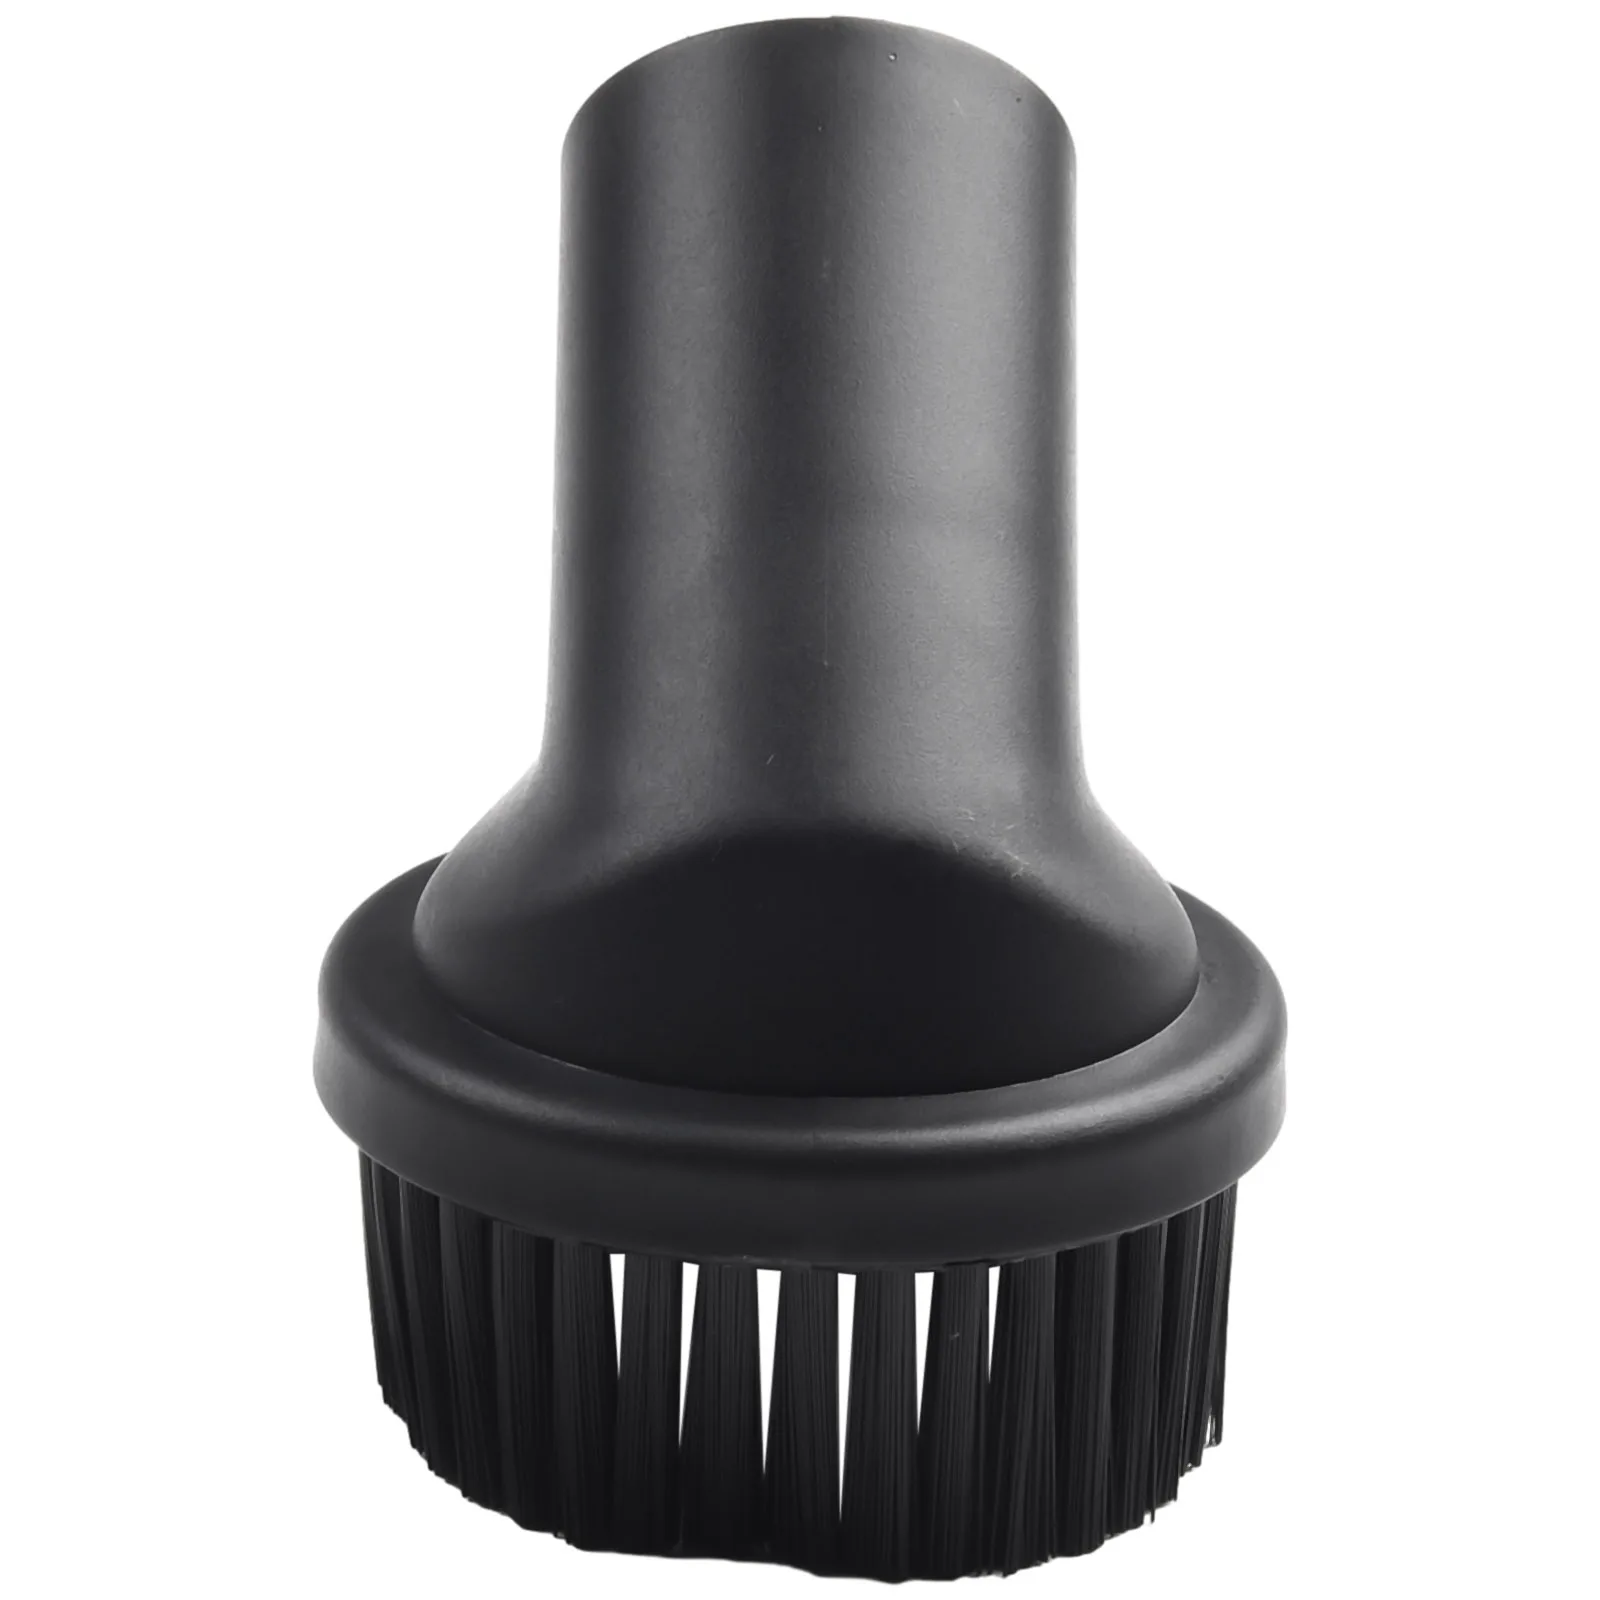 

1pcs Suction Brush For Bosch For GAS, Ø 35 Mm, Vacuum Cleaner Sweeper Reducer Attachment Converter Dust Hose Port Adapter